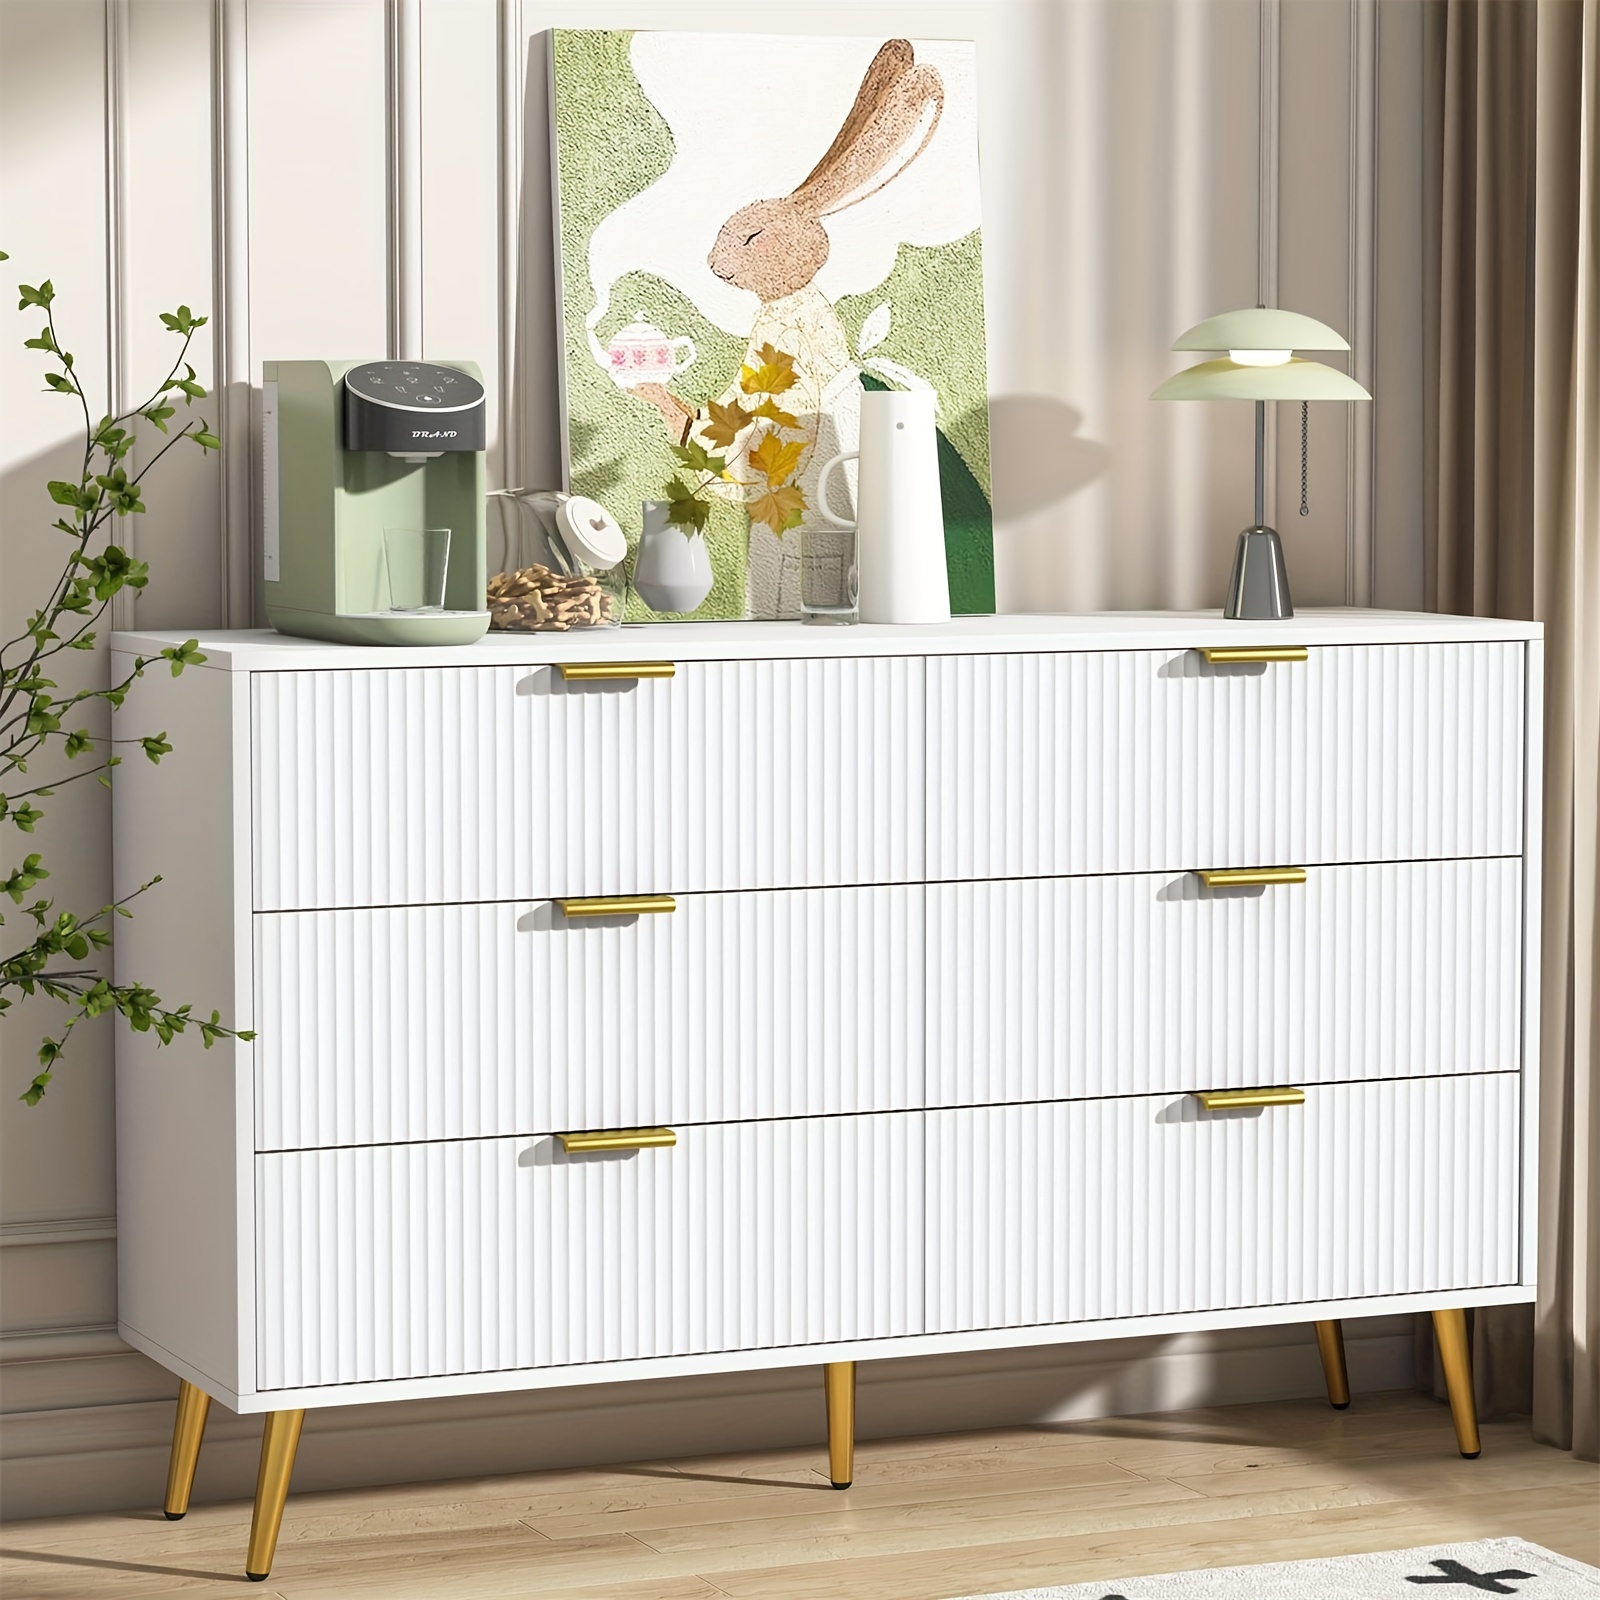 

6 Drawer Double Dresser, Modern Dressers Chest Of Drawers With Fluted Panel, Wide Wood Storage Dresser Organizer, Dresser Tv Stand Cabinet For Bedroom, Living Room